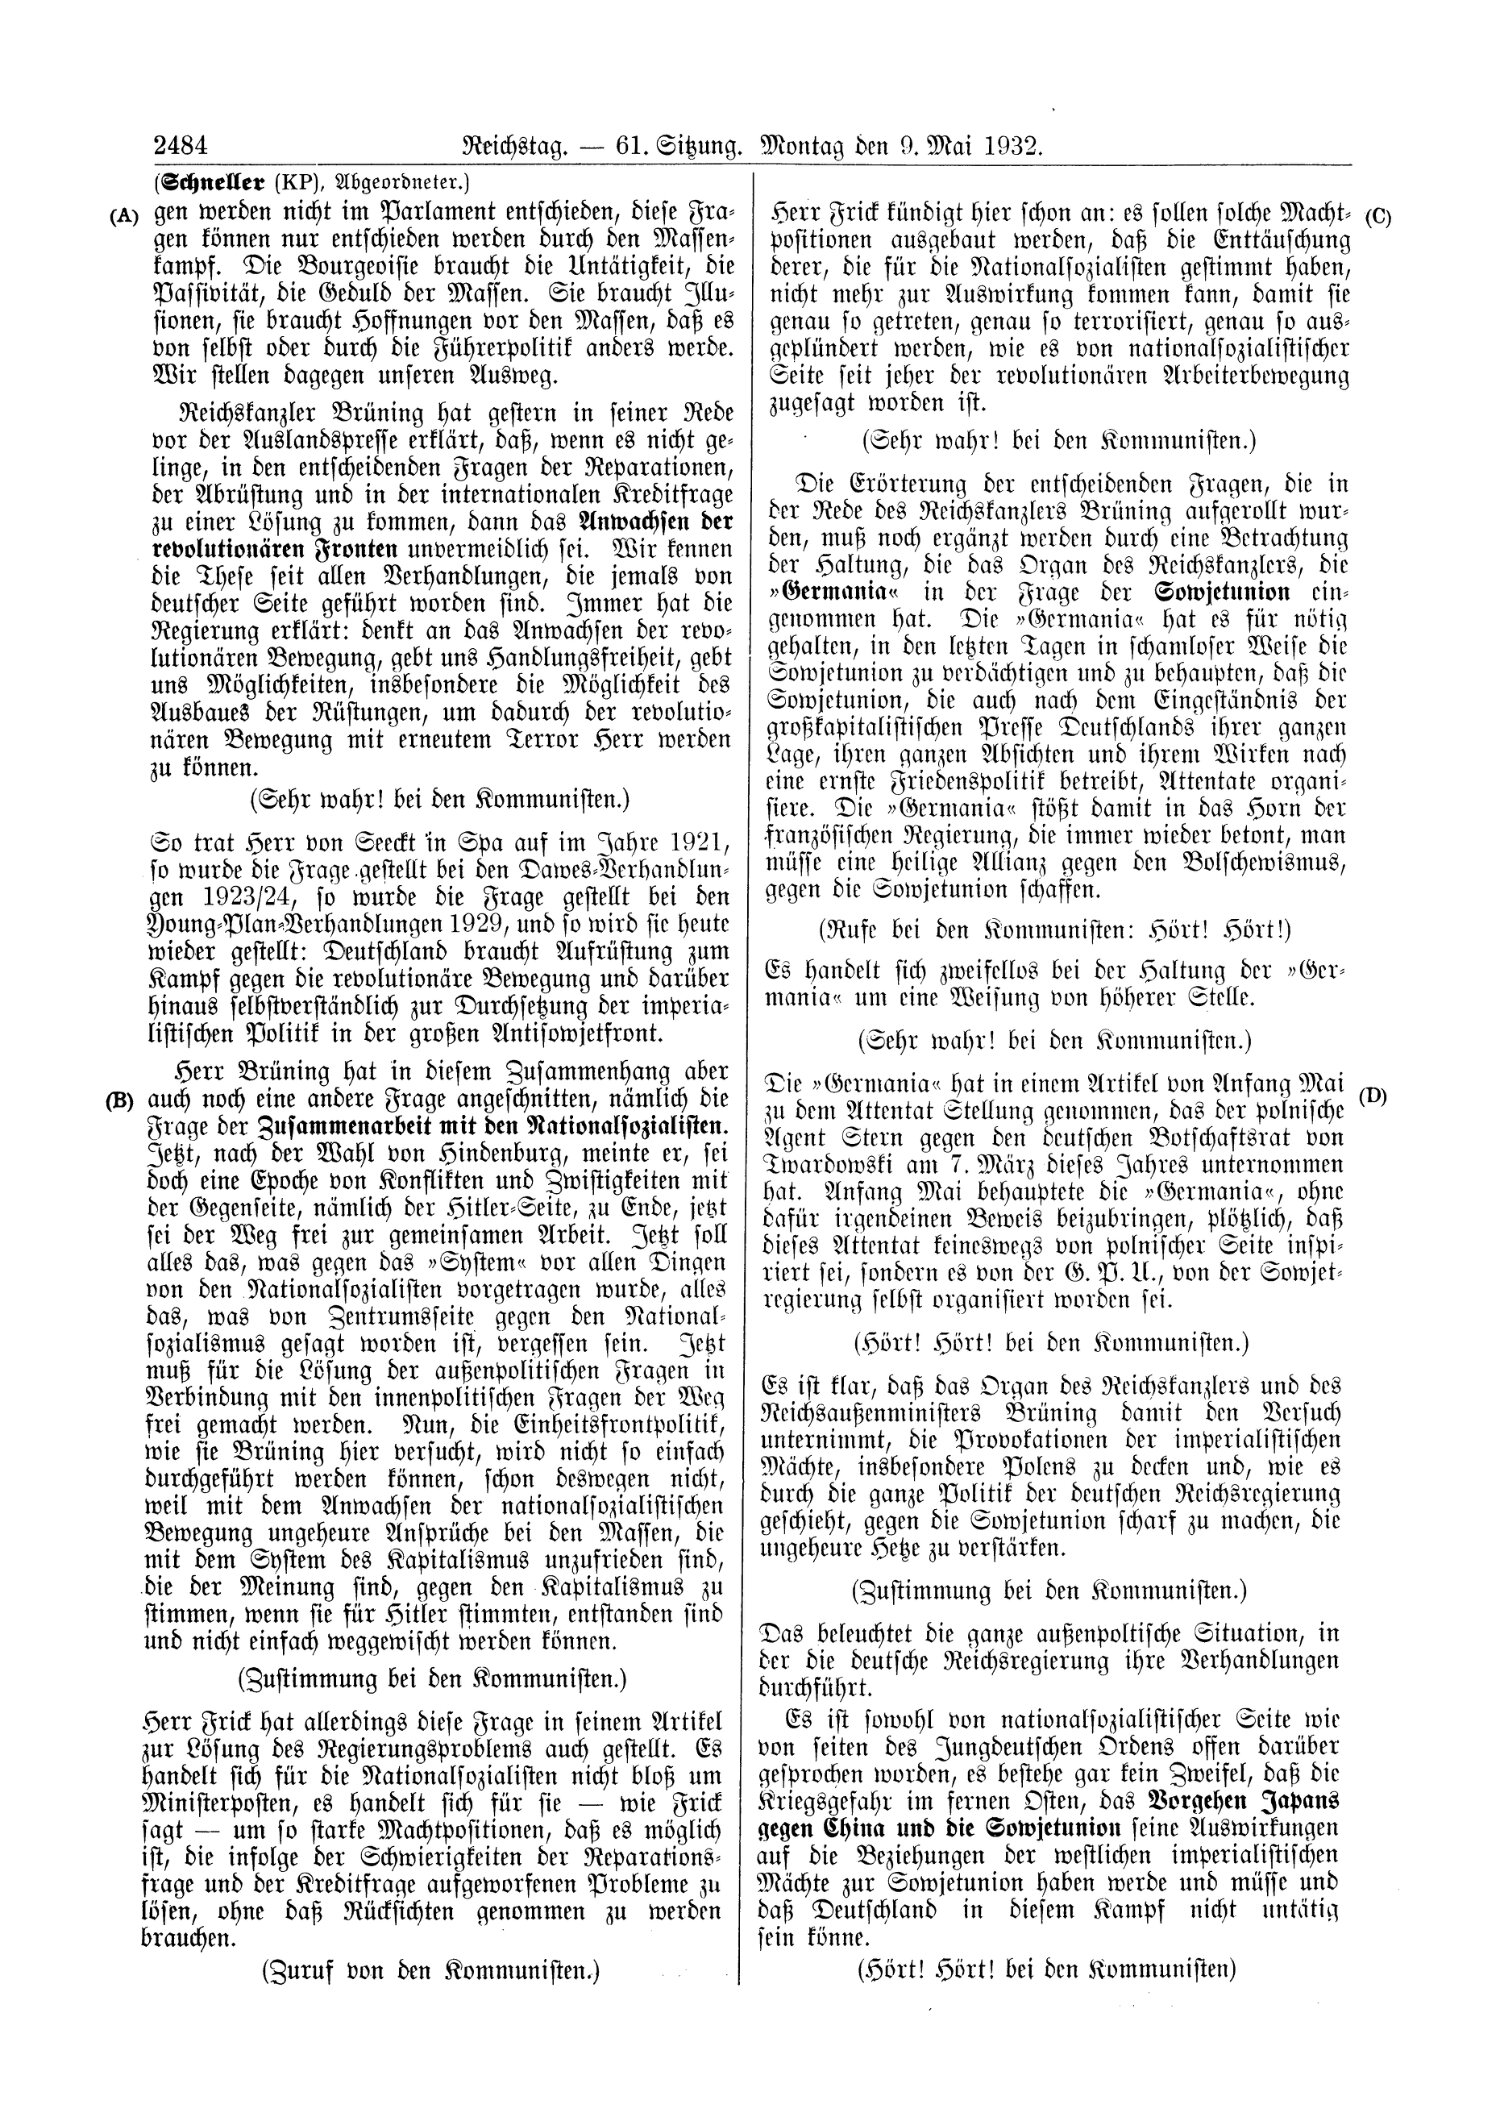 Scan of page 2484